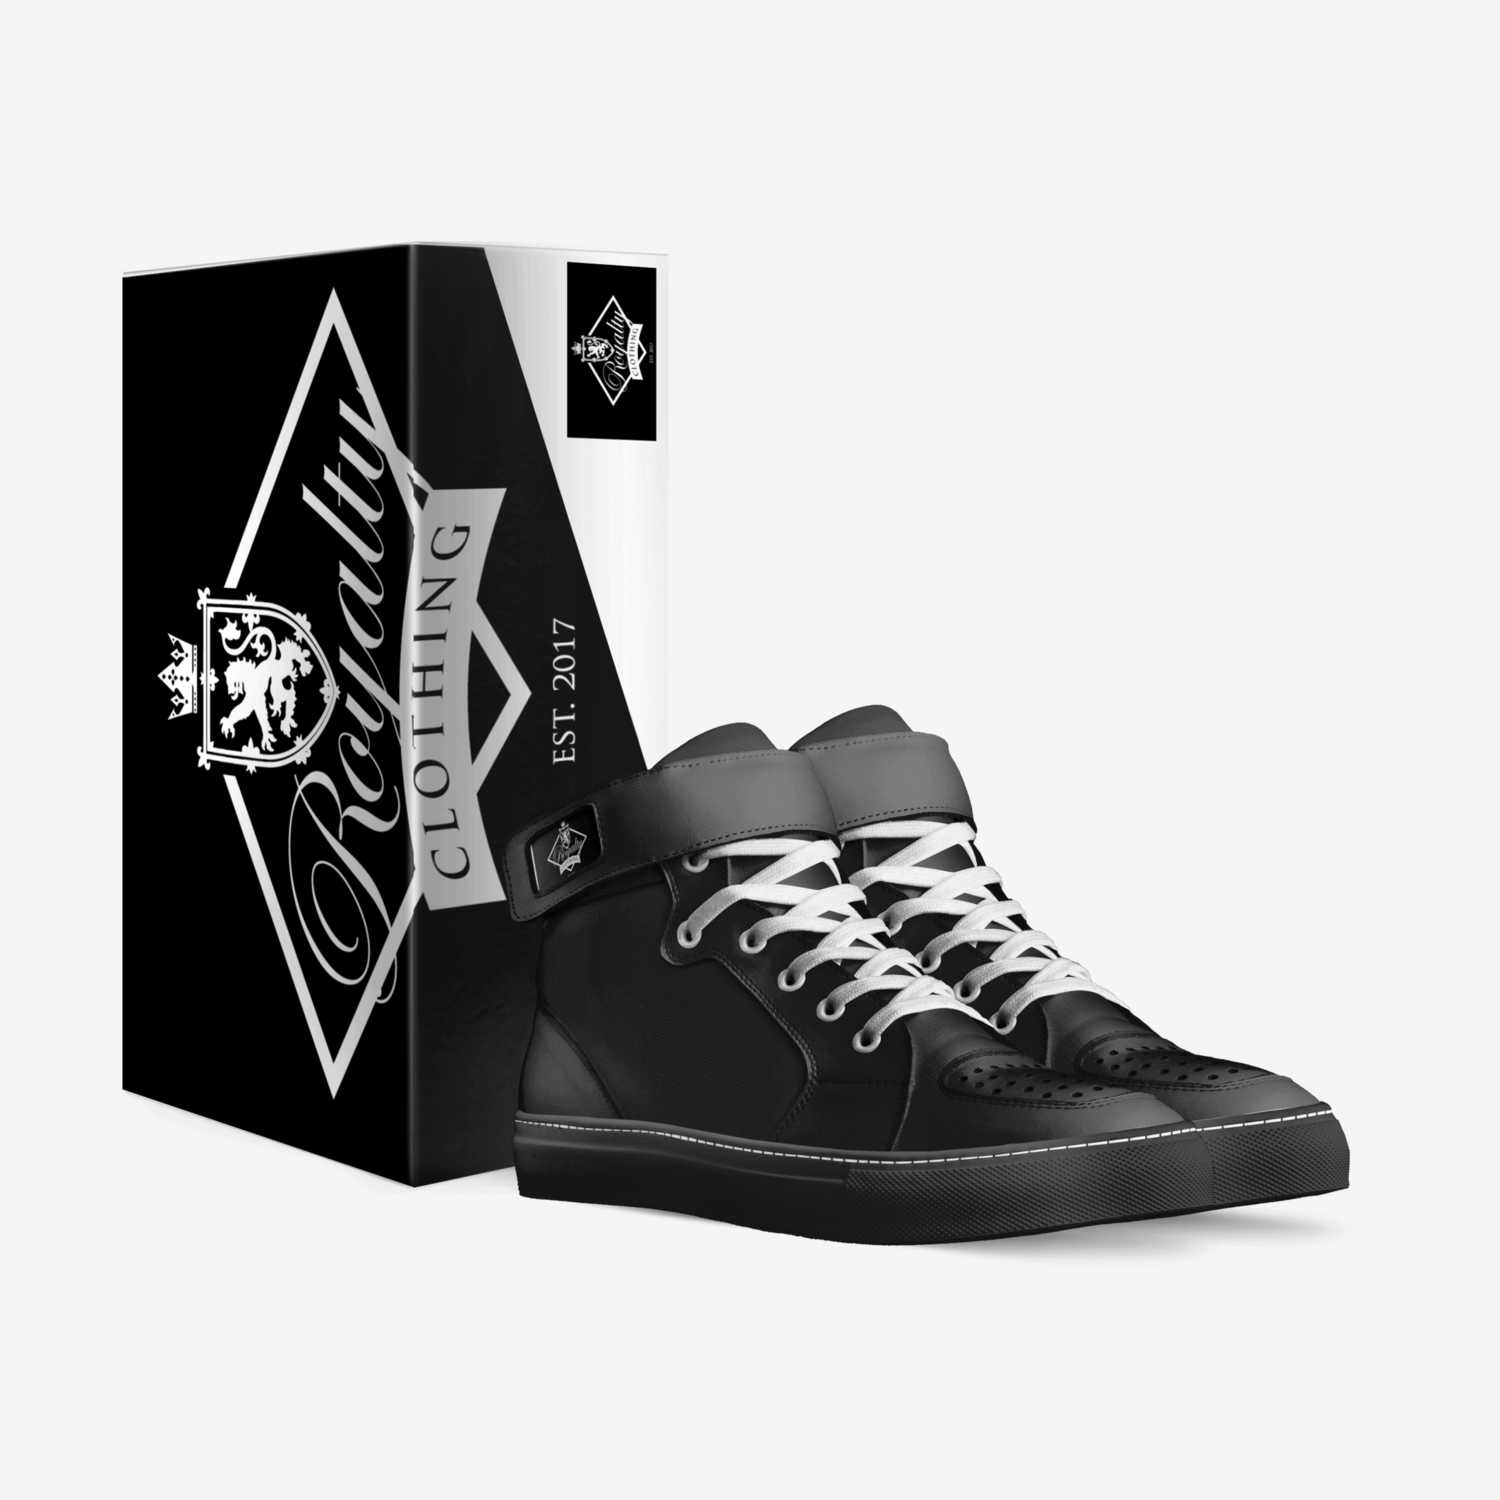 Royalty 902s custom made in Italy shoes by Dyvonta Johnston | Box view